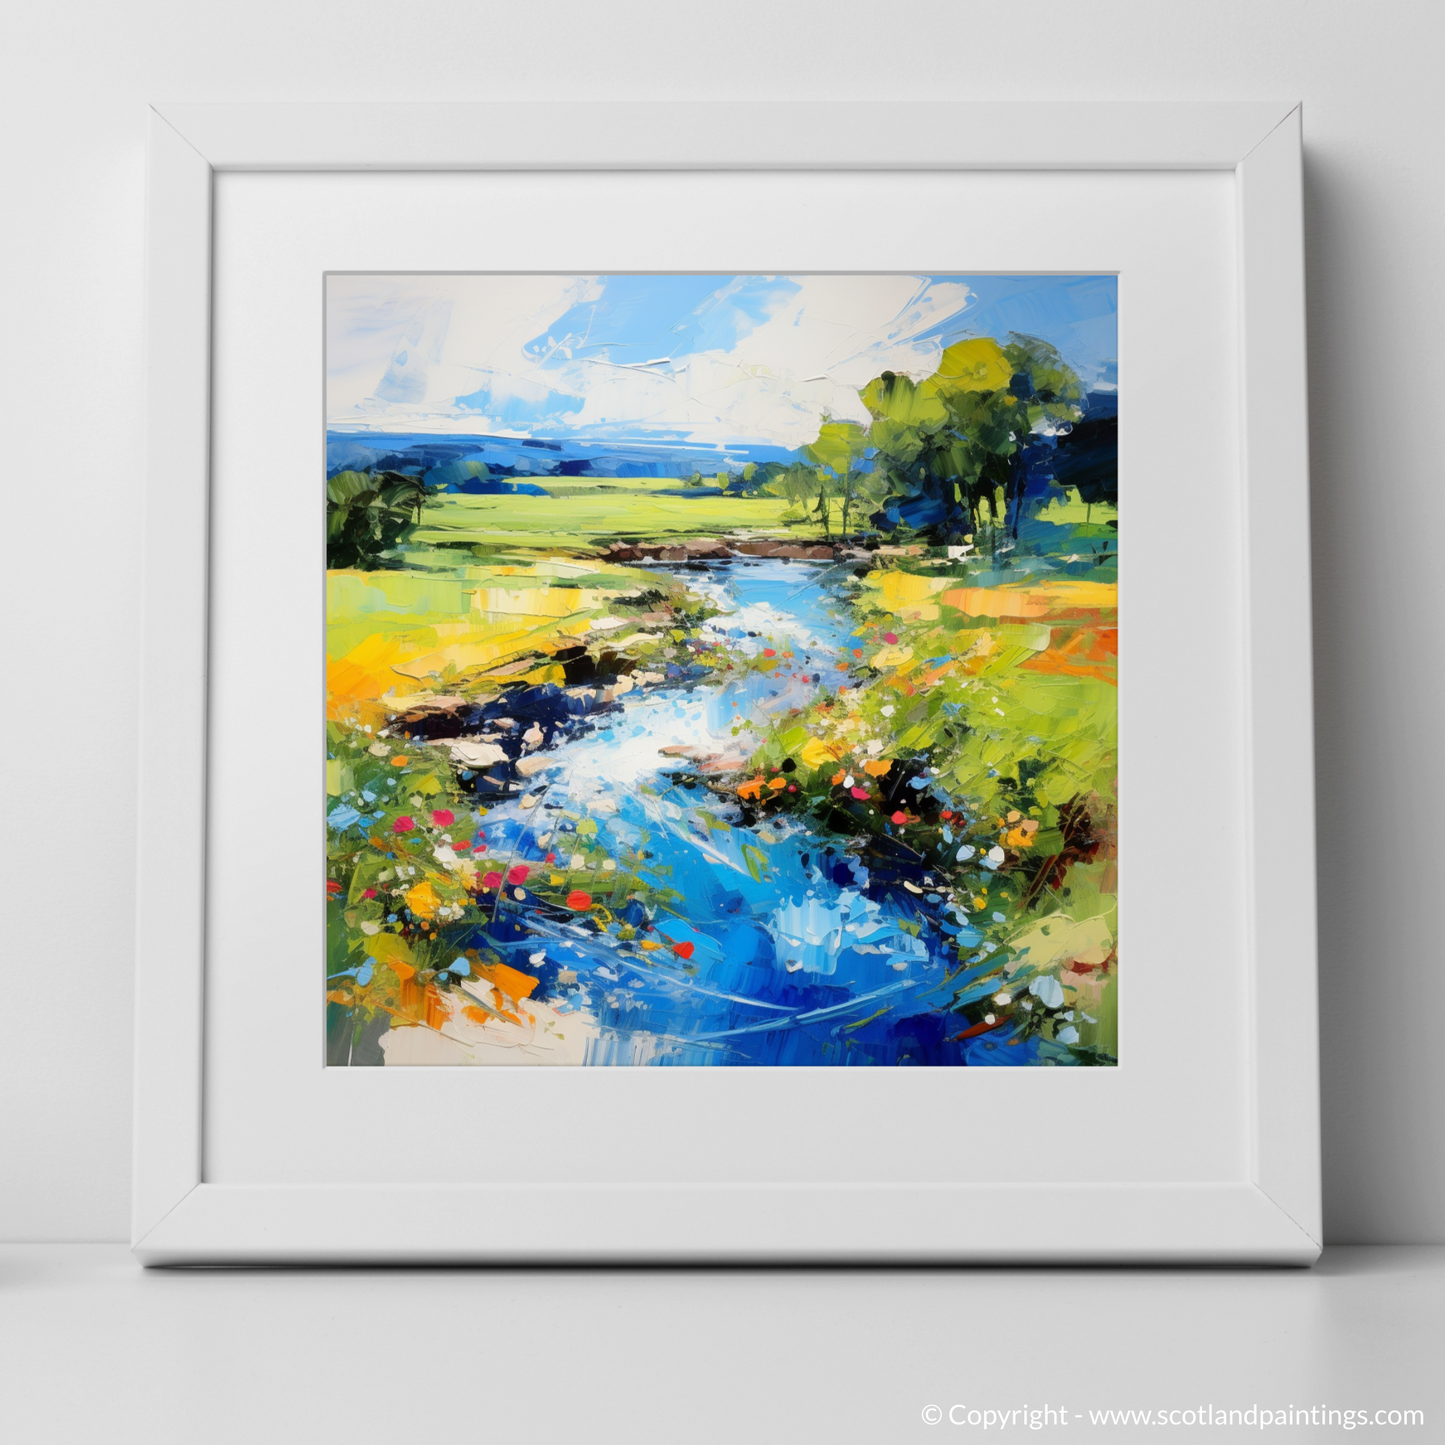 Art Print of River Carron, Ross-shire in summer with a white frame